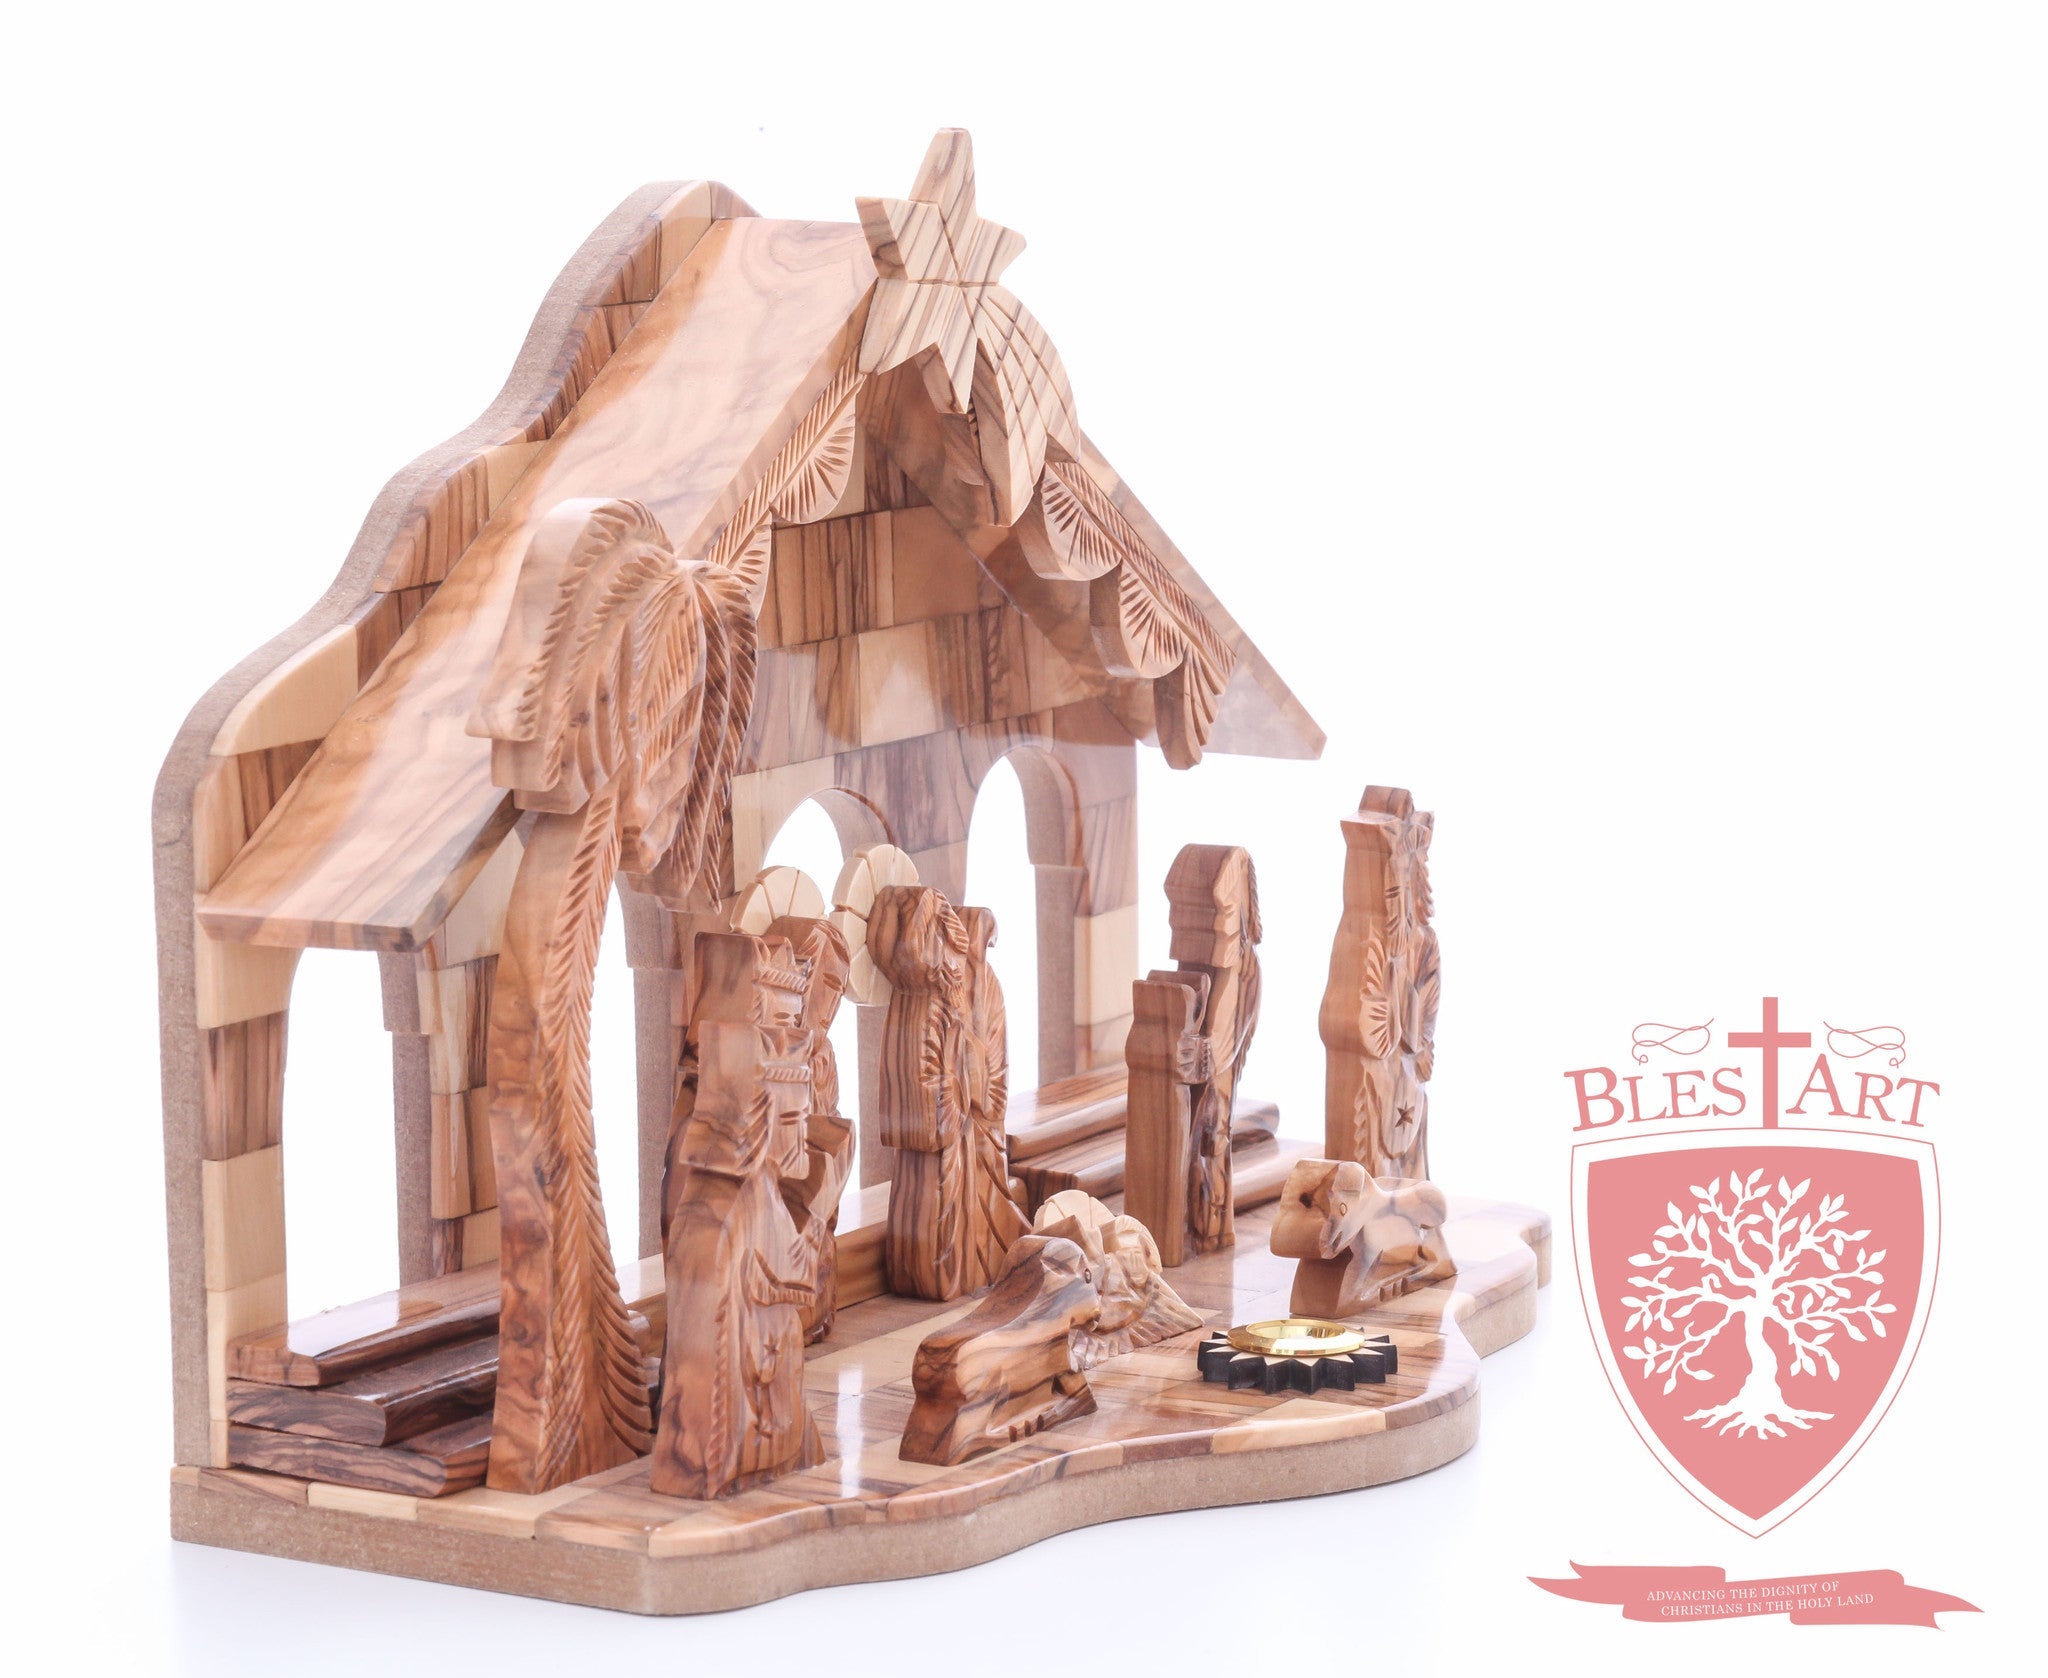 Nativity Set, with 2-D figures and Incense from the tomb of jesus. Size: 10" 5" 7.5"